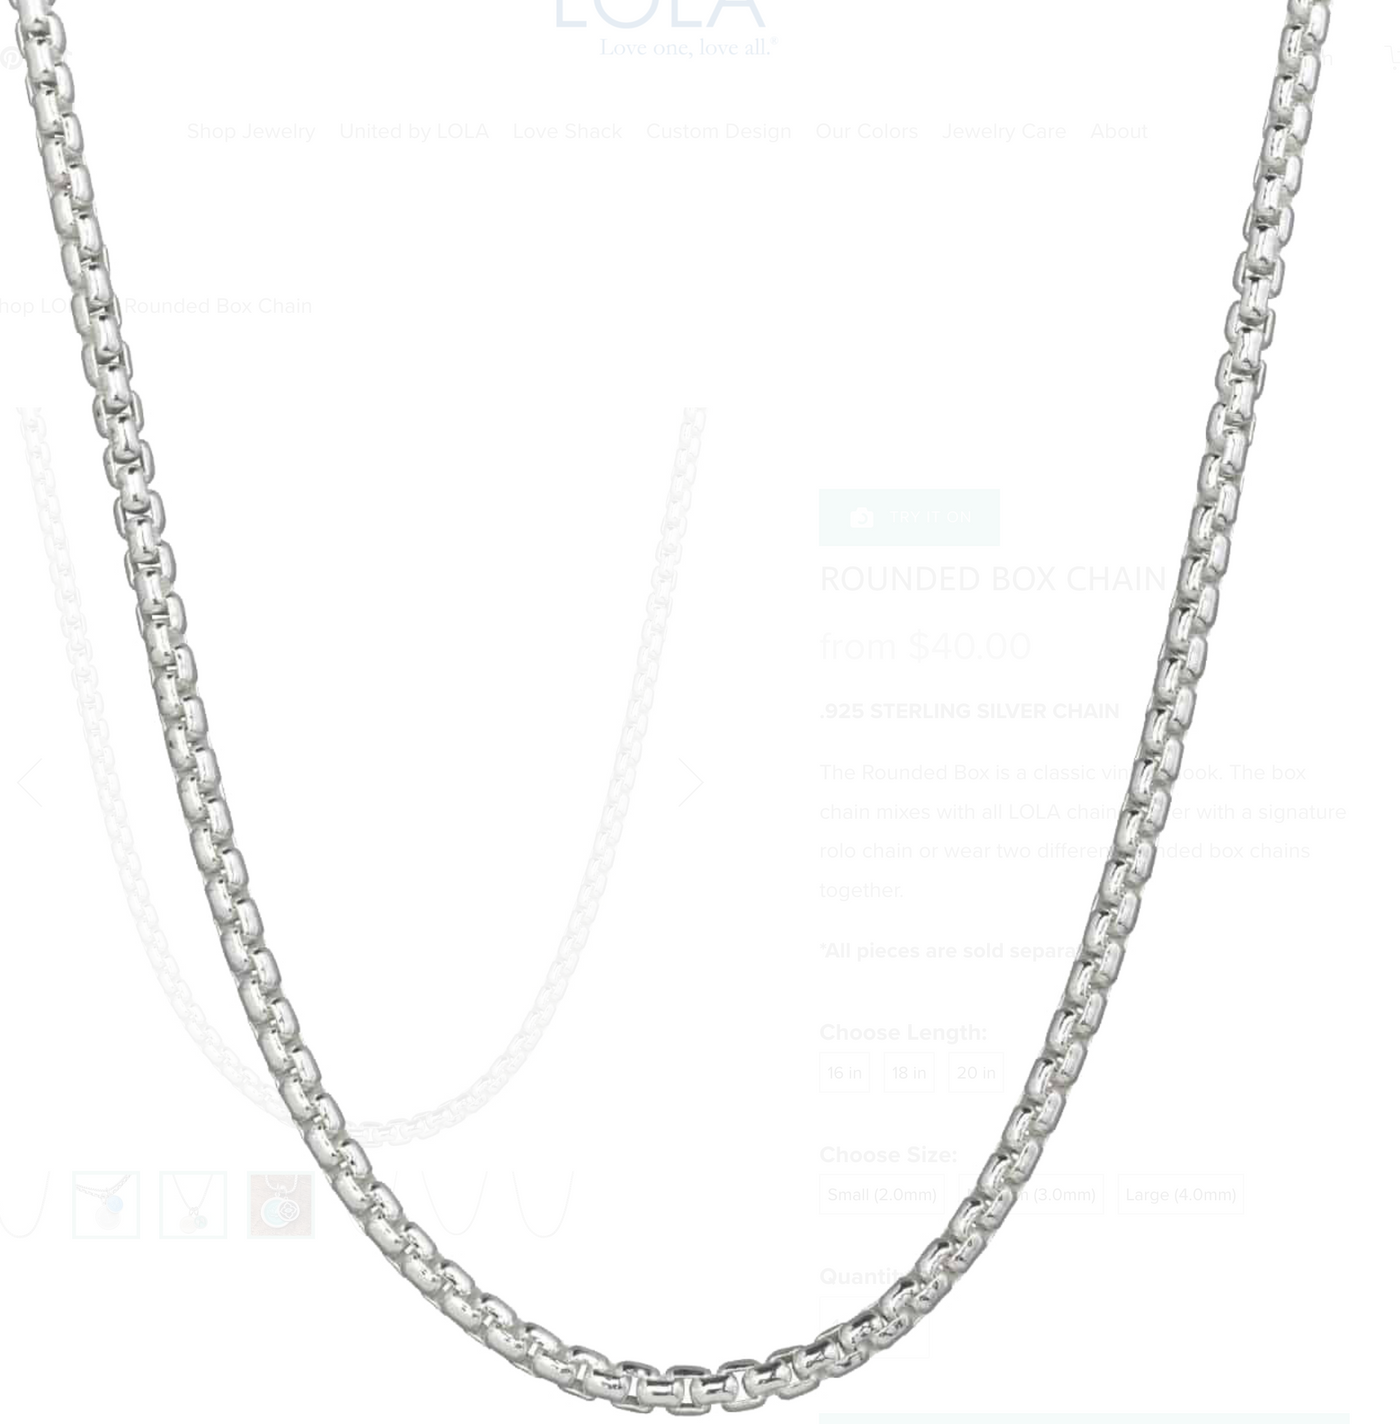 Rounded Box Chain 2.0mm 18", Silver